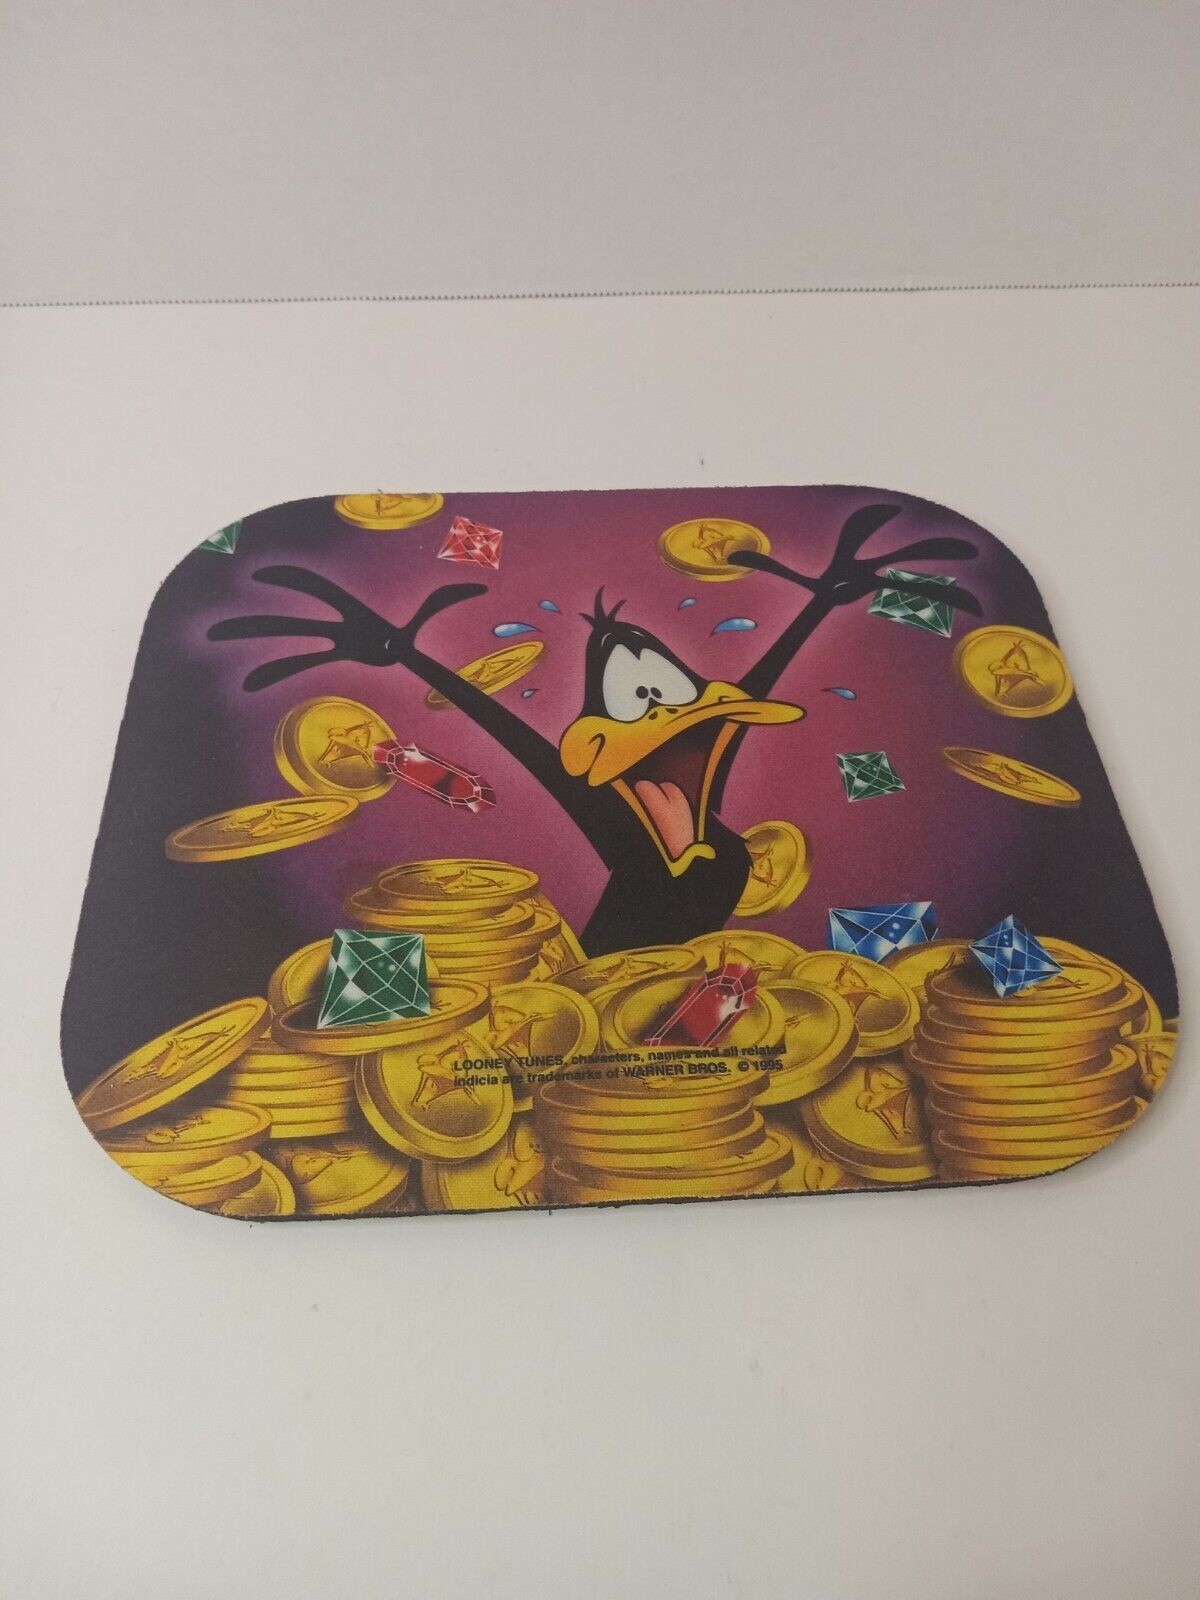 Looney Tunes Daffy Duck Vintage 1995 Foam Mouse Pad